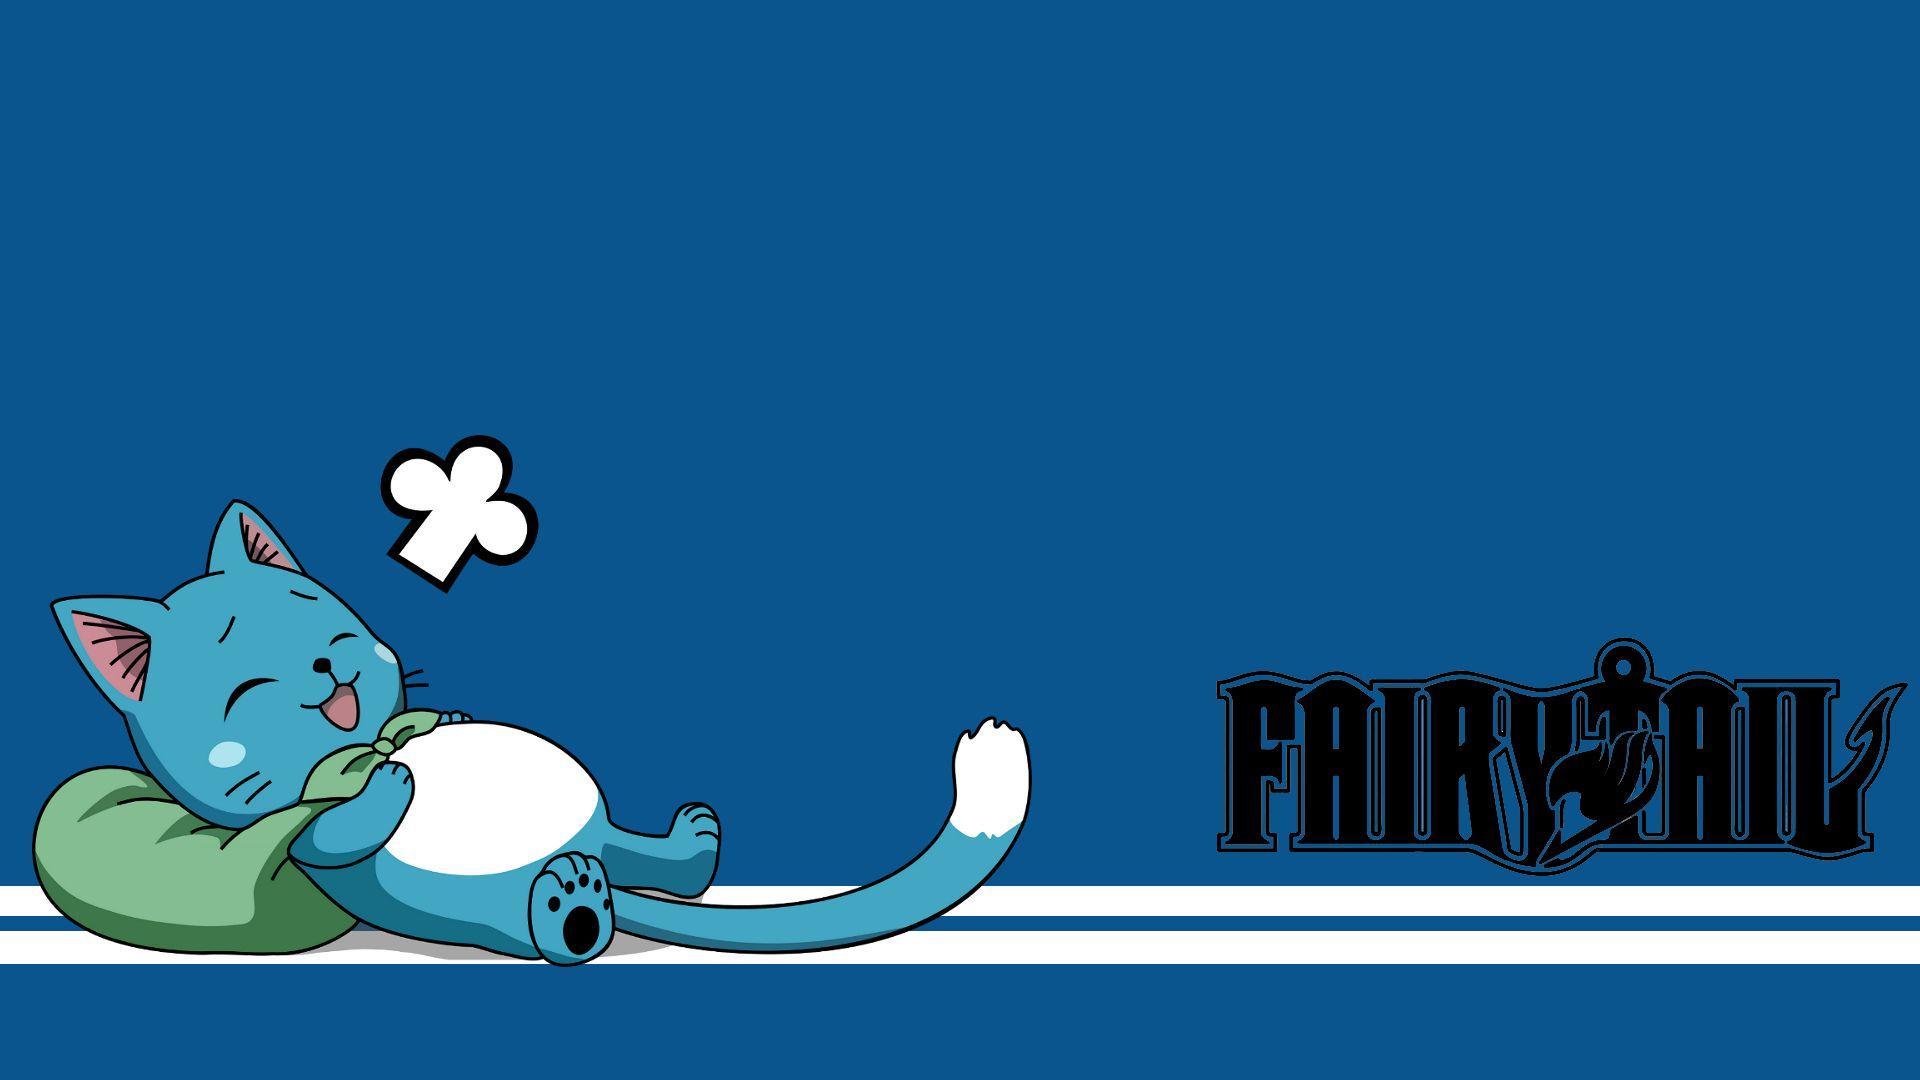 Fairy Tail wallpapers 38